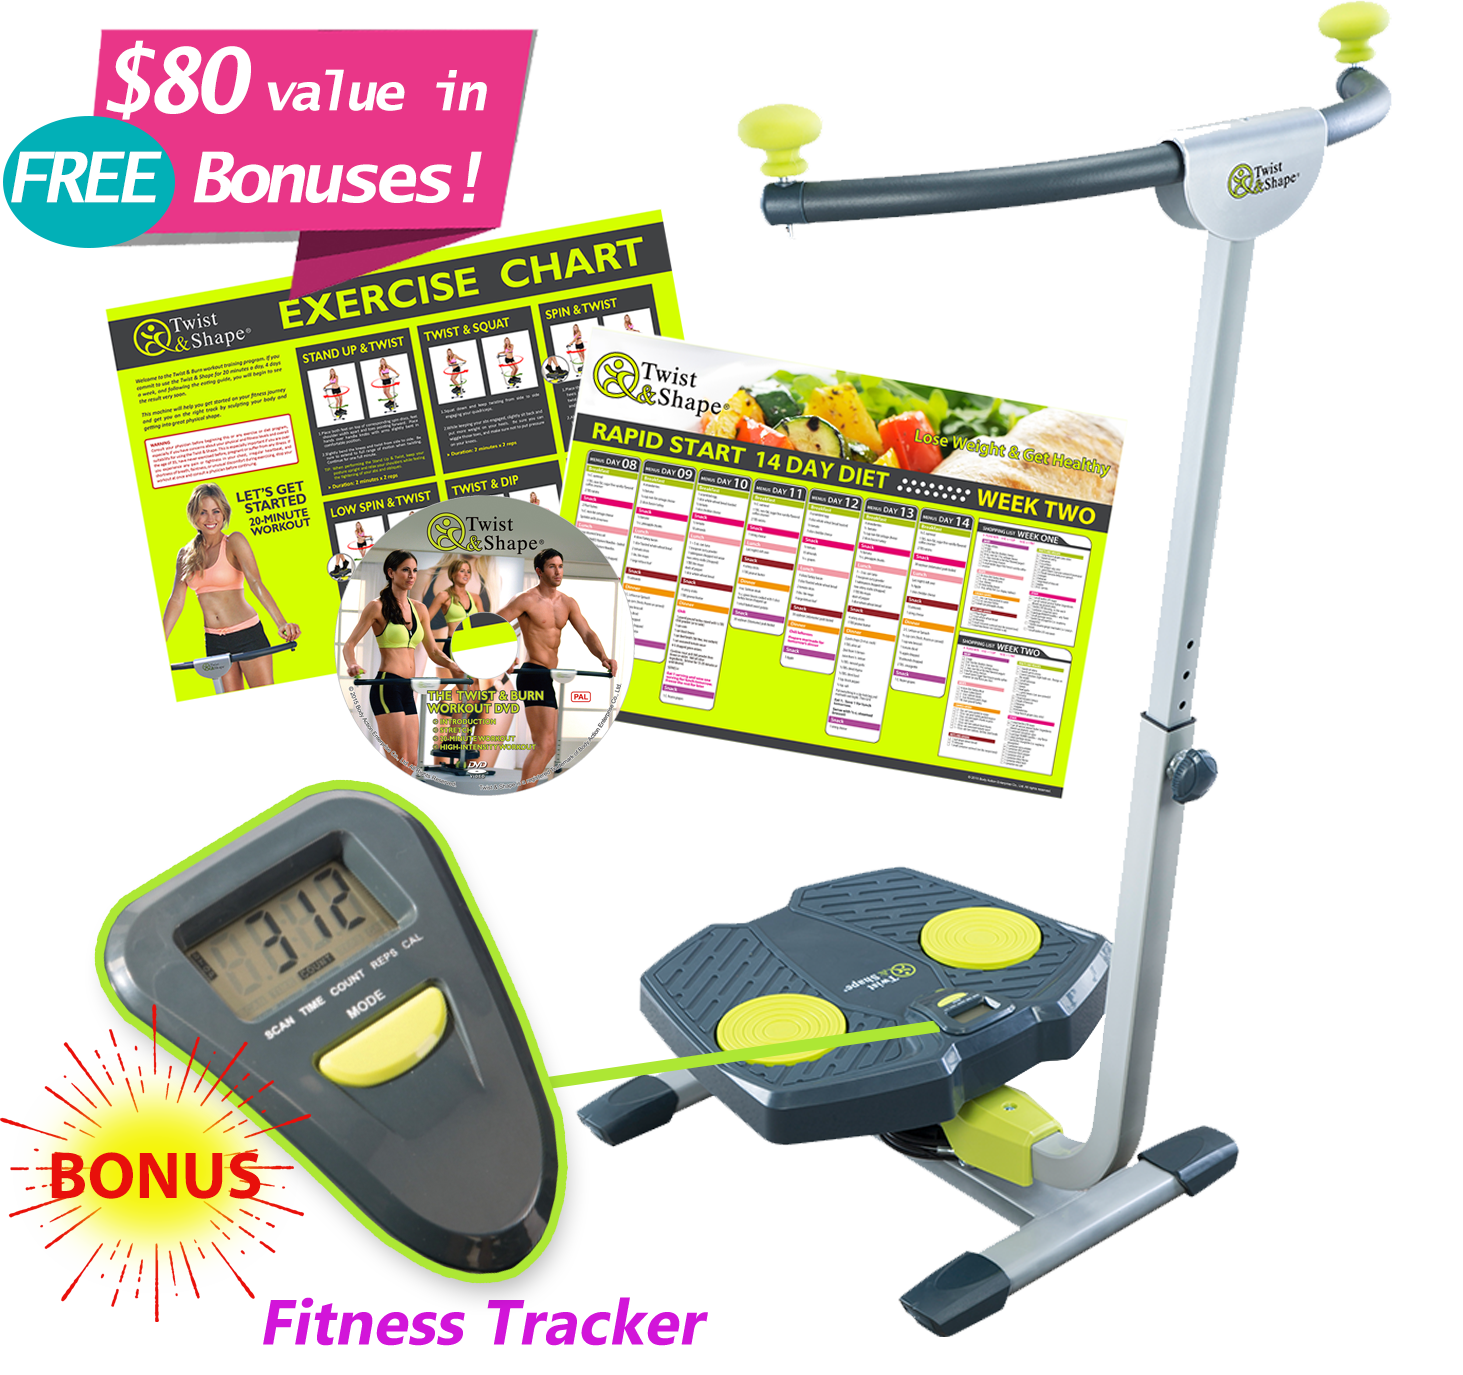 Twist & shape comes with an exercise dvd, fitness tracker, exercise chart and 14 day meal plan.